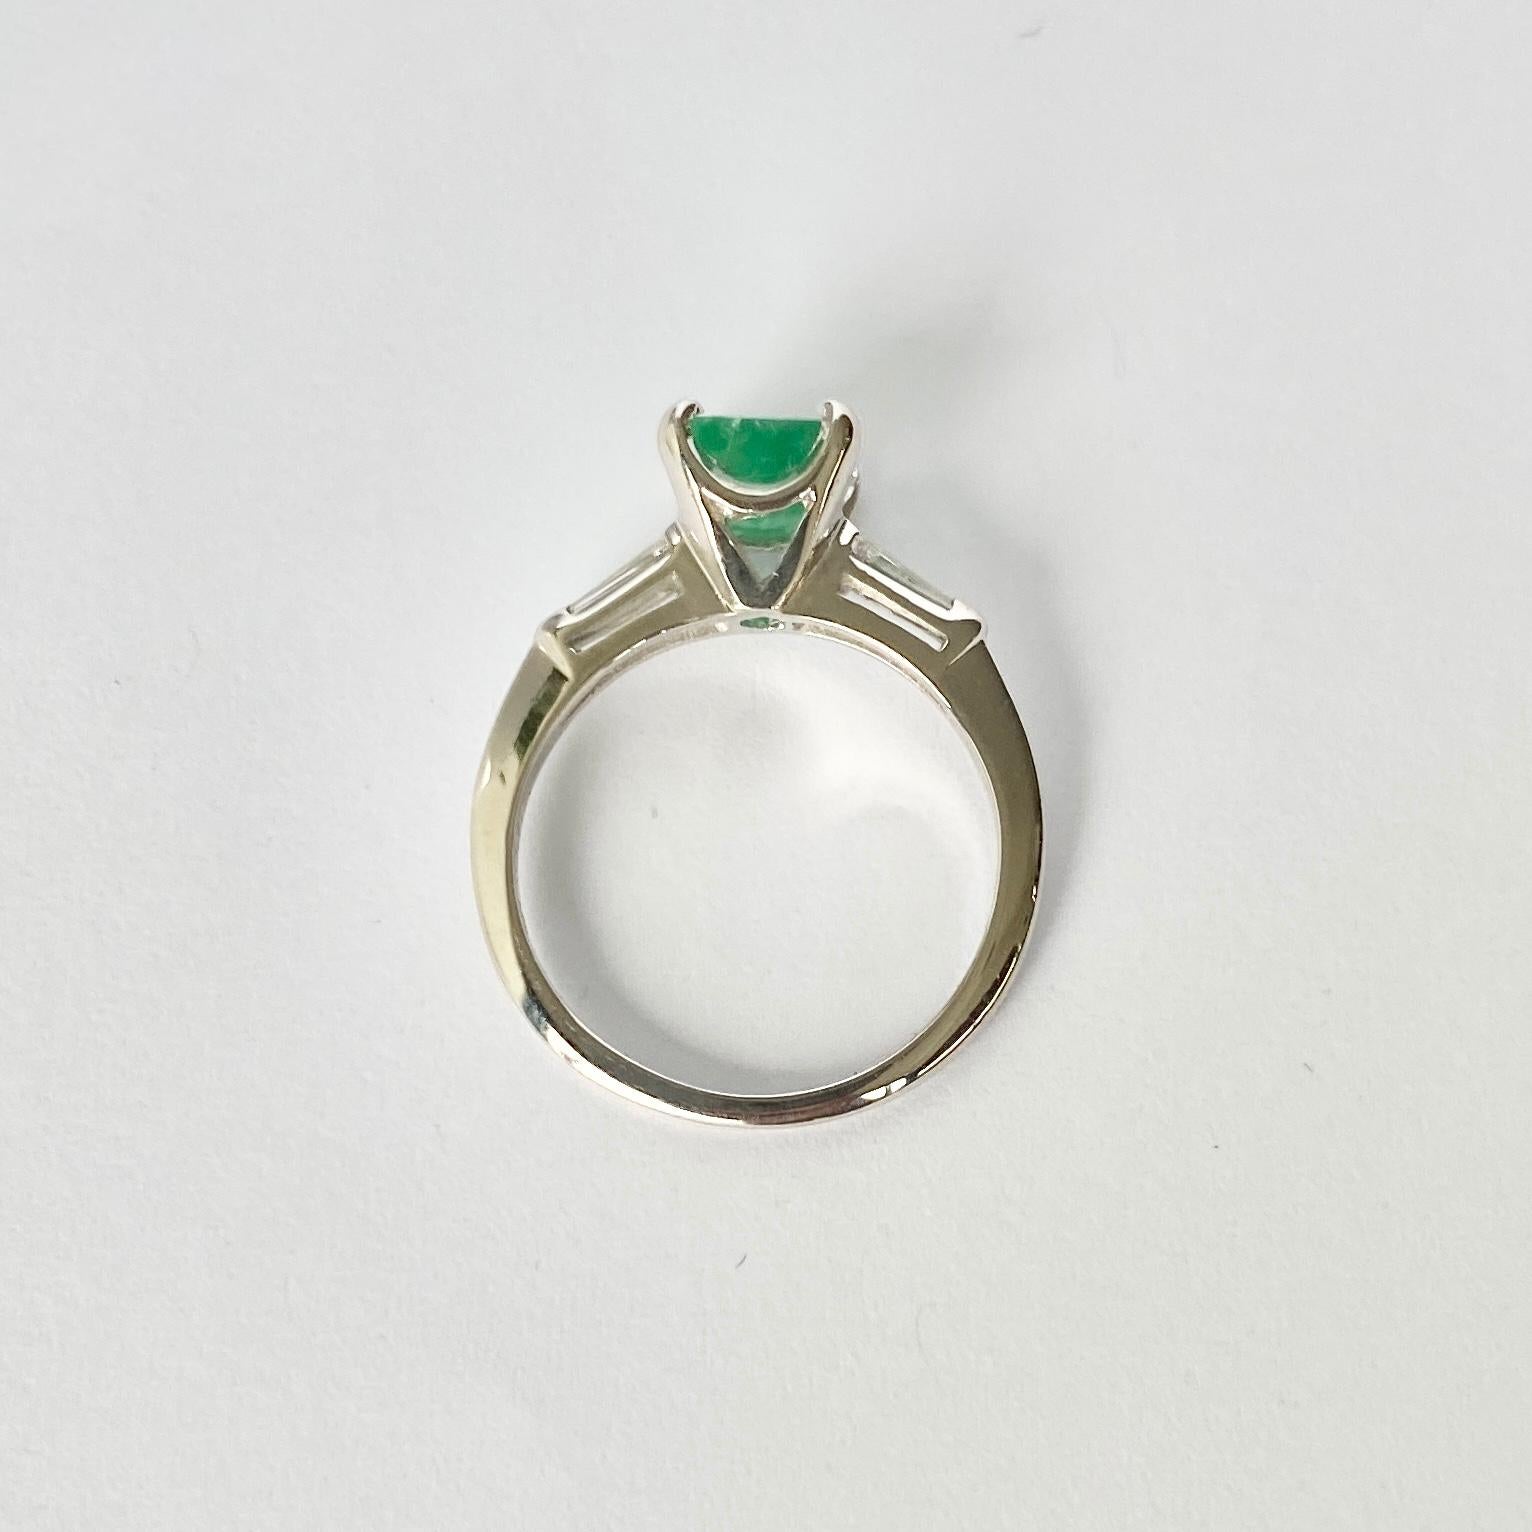 The Emerald in this ring measures 1ct and is a great colour. Either side sit a tapered baguette diamond on the shoulders. The ring is modelled out of 14ct white gold. 

Ring Size: K 1/2 or 5 1/2 
Height Off Finger: 8mm

Weight: 2.3g